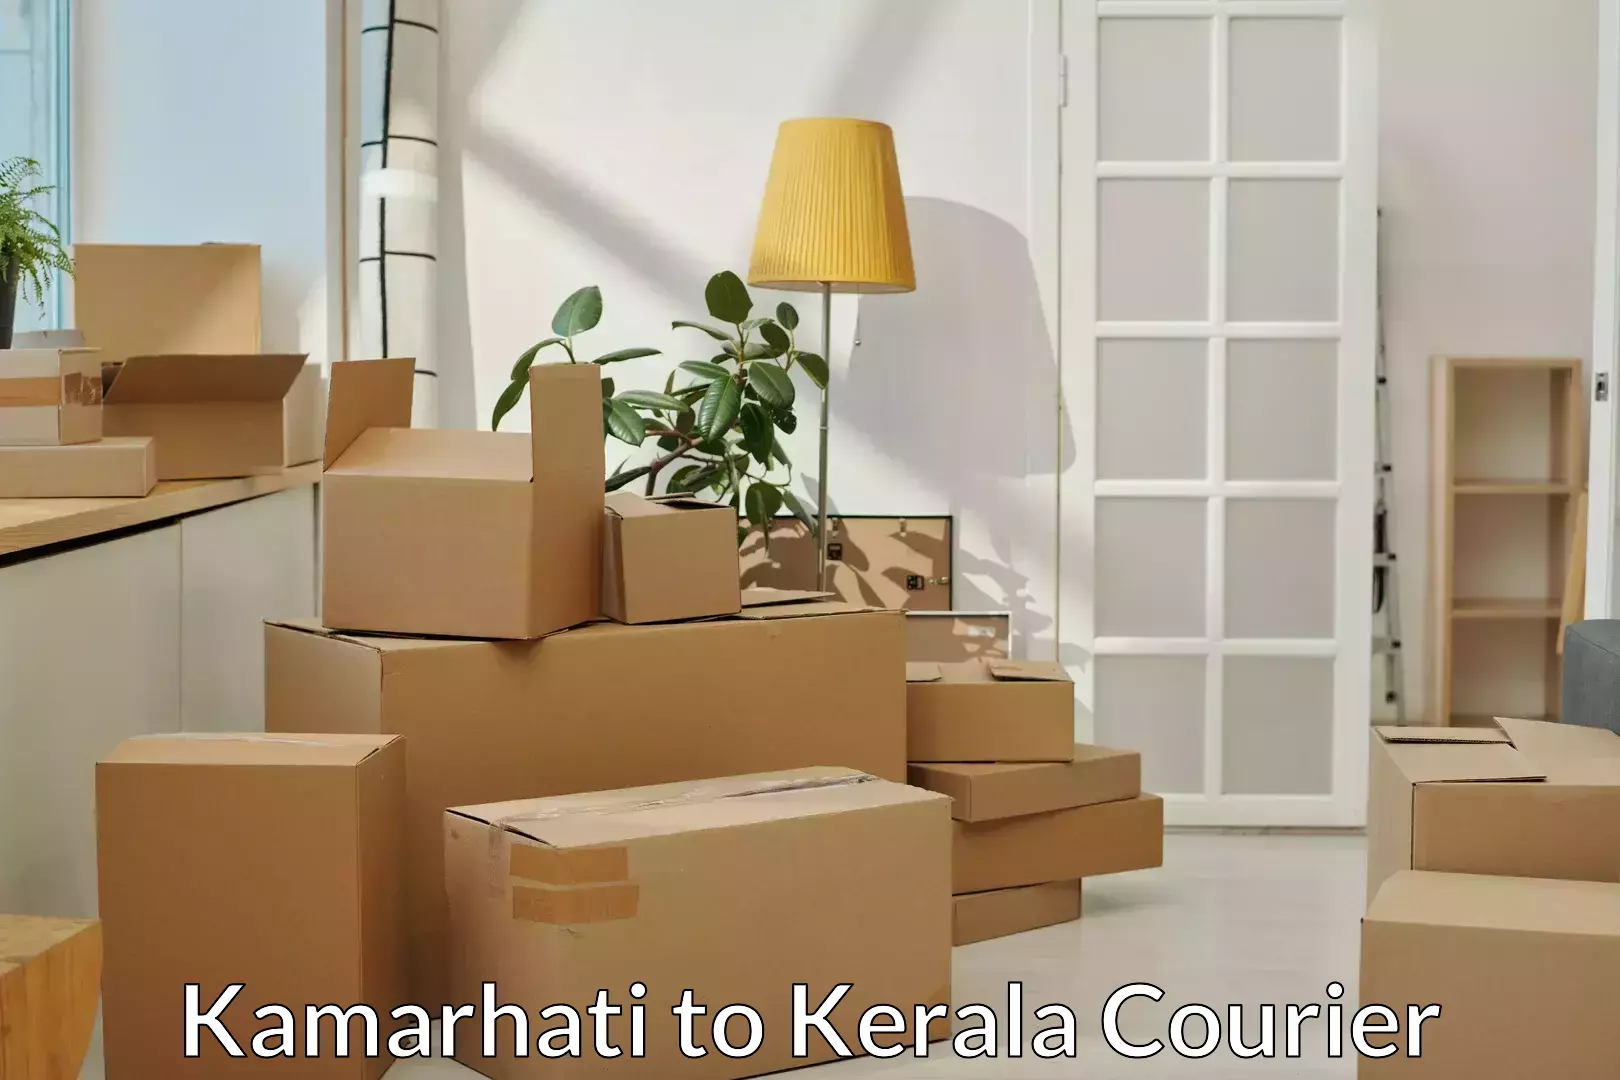 Trusted relocation experts Kamarhati to Kerala